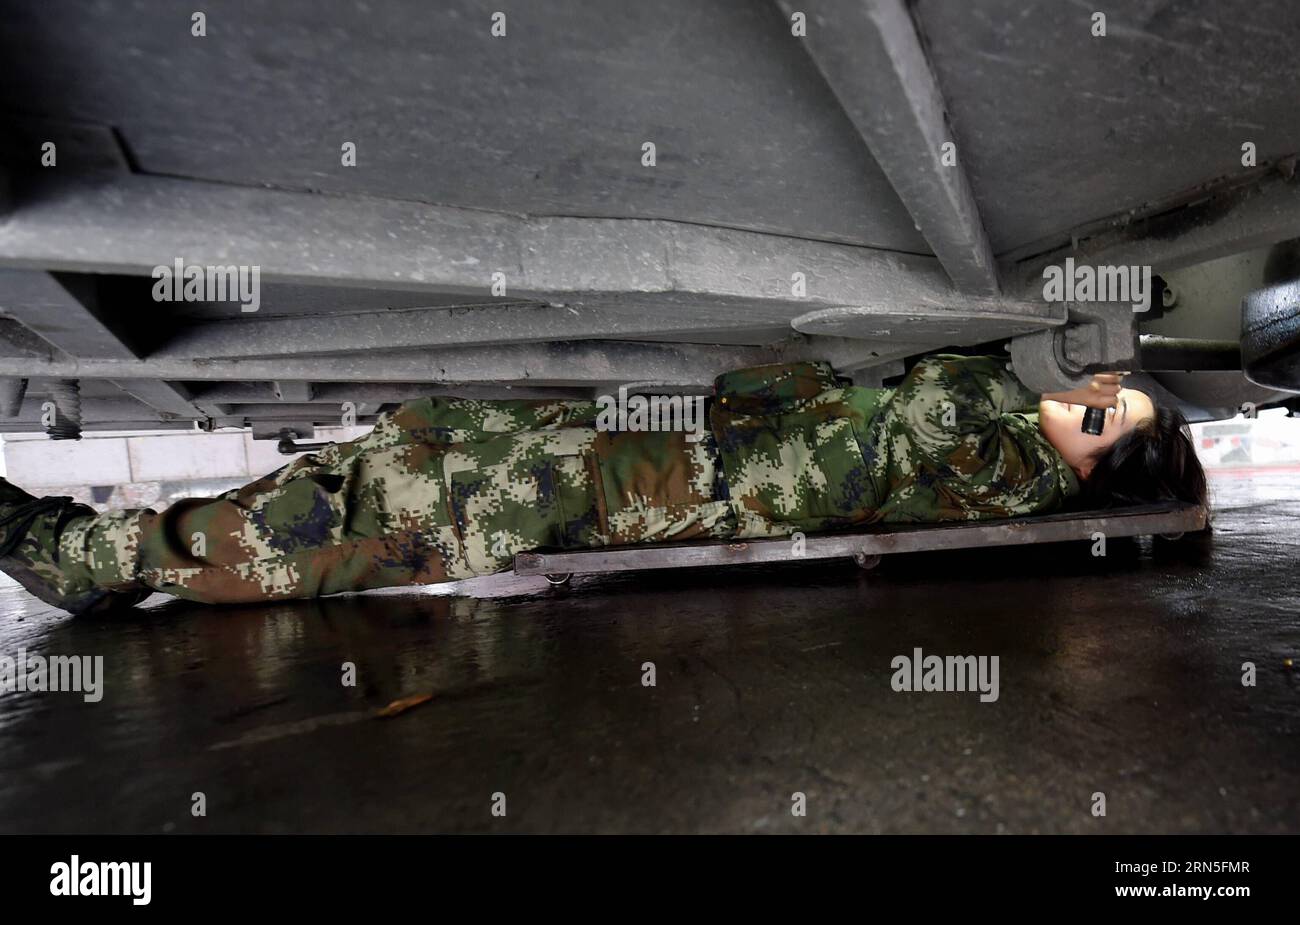 DEHONG, June 24, 2015 -- Zhang Liu checks the bottom of a car for contraband at the border checkpoint of Mukang in Dehong Dai-Jingpo Autonomous Prefecture, southwest China s Yunnan Province, June 24, 2015. Born in 1995, Zhang Liu became an anti-drug soldier in border checkpoint of Mukang in 2013. Grown up in an affluent family in central China s Hunan Province, Zhang said that being a soldier had always been her dream, which drove her to join the army after graduating from high school. Being a front line anti-drug force, the border checkpoint of Mukang has captured about 100 kilograms of drugs Stock Photo